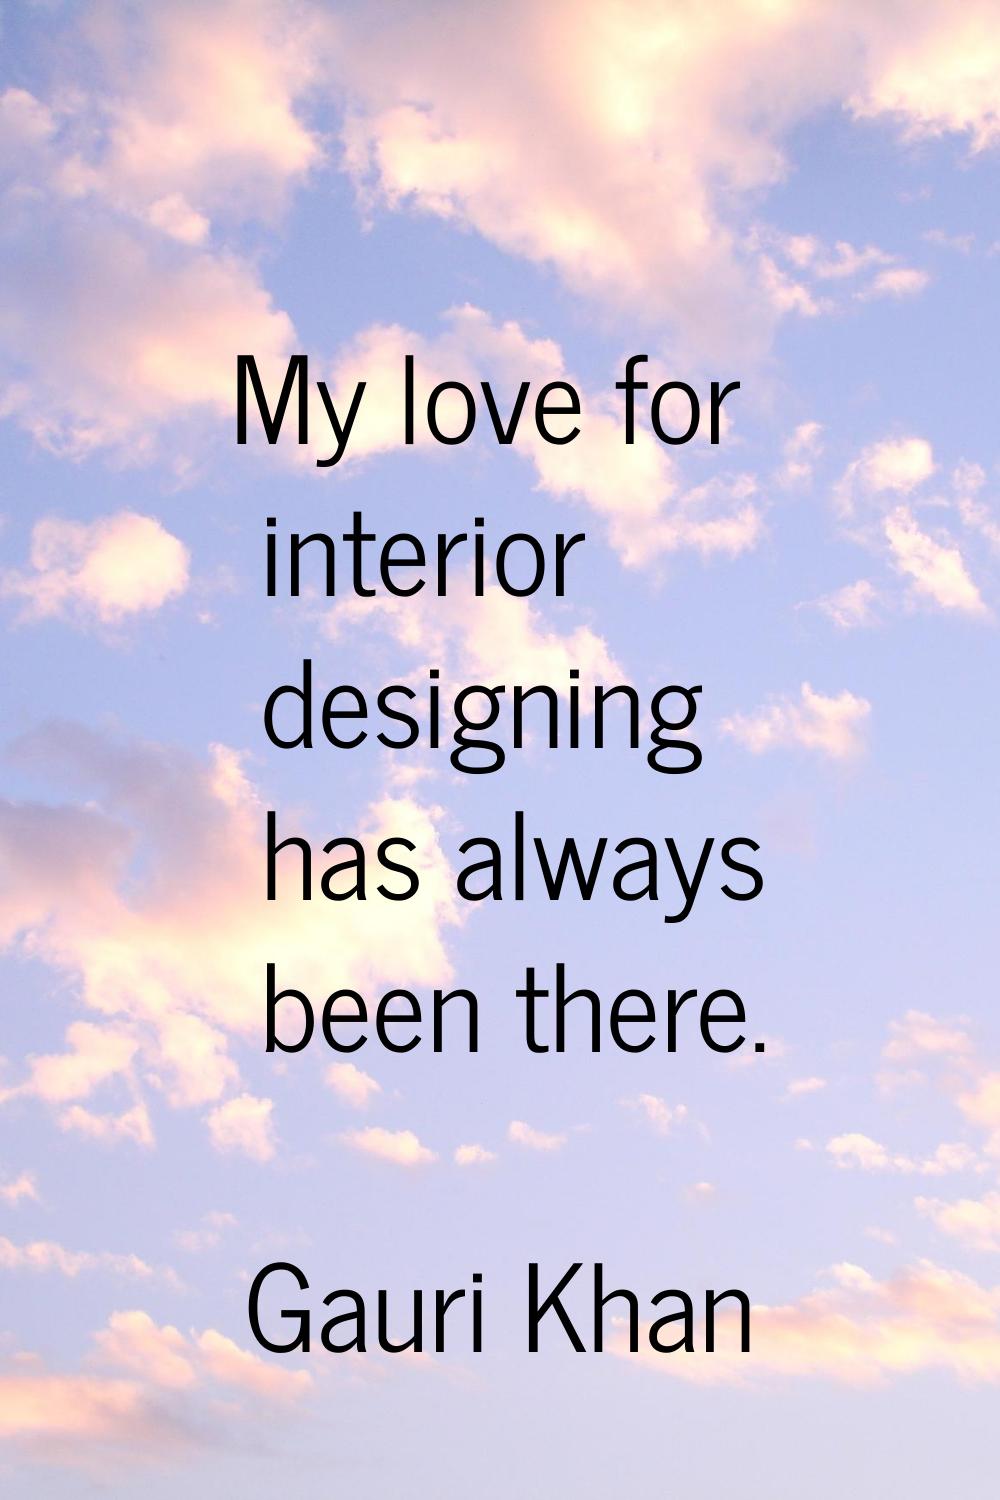 My love for interior designing has always been there.